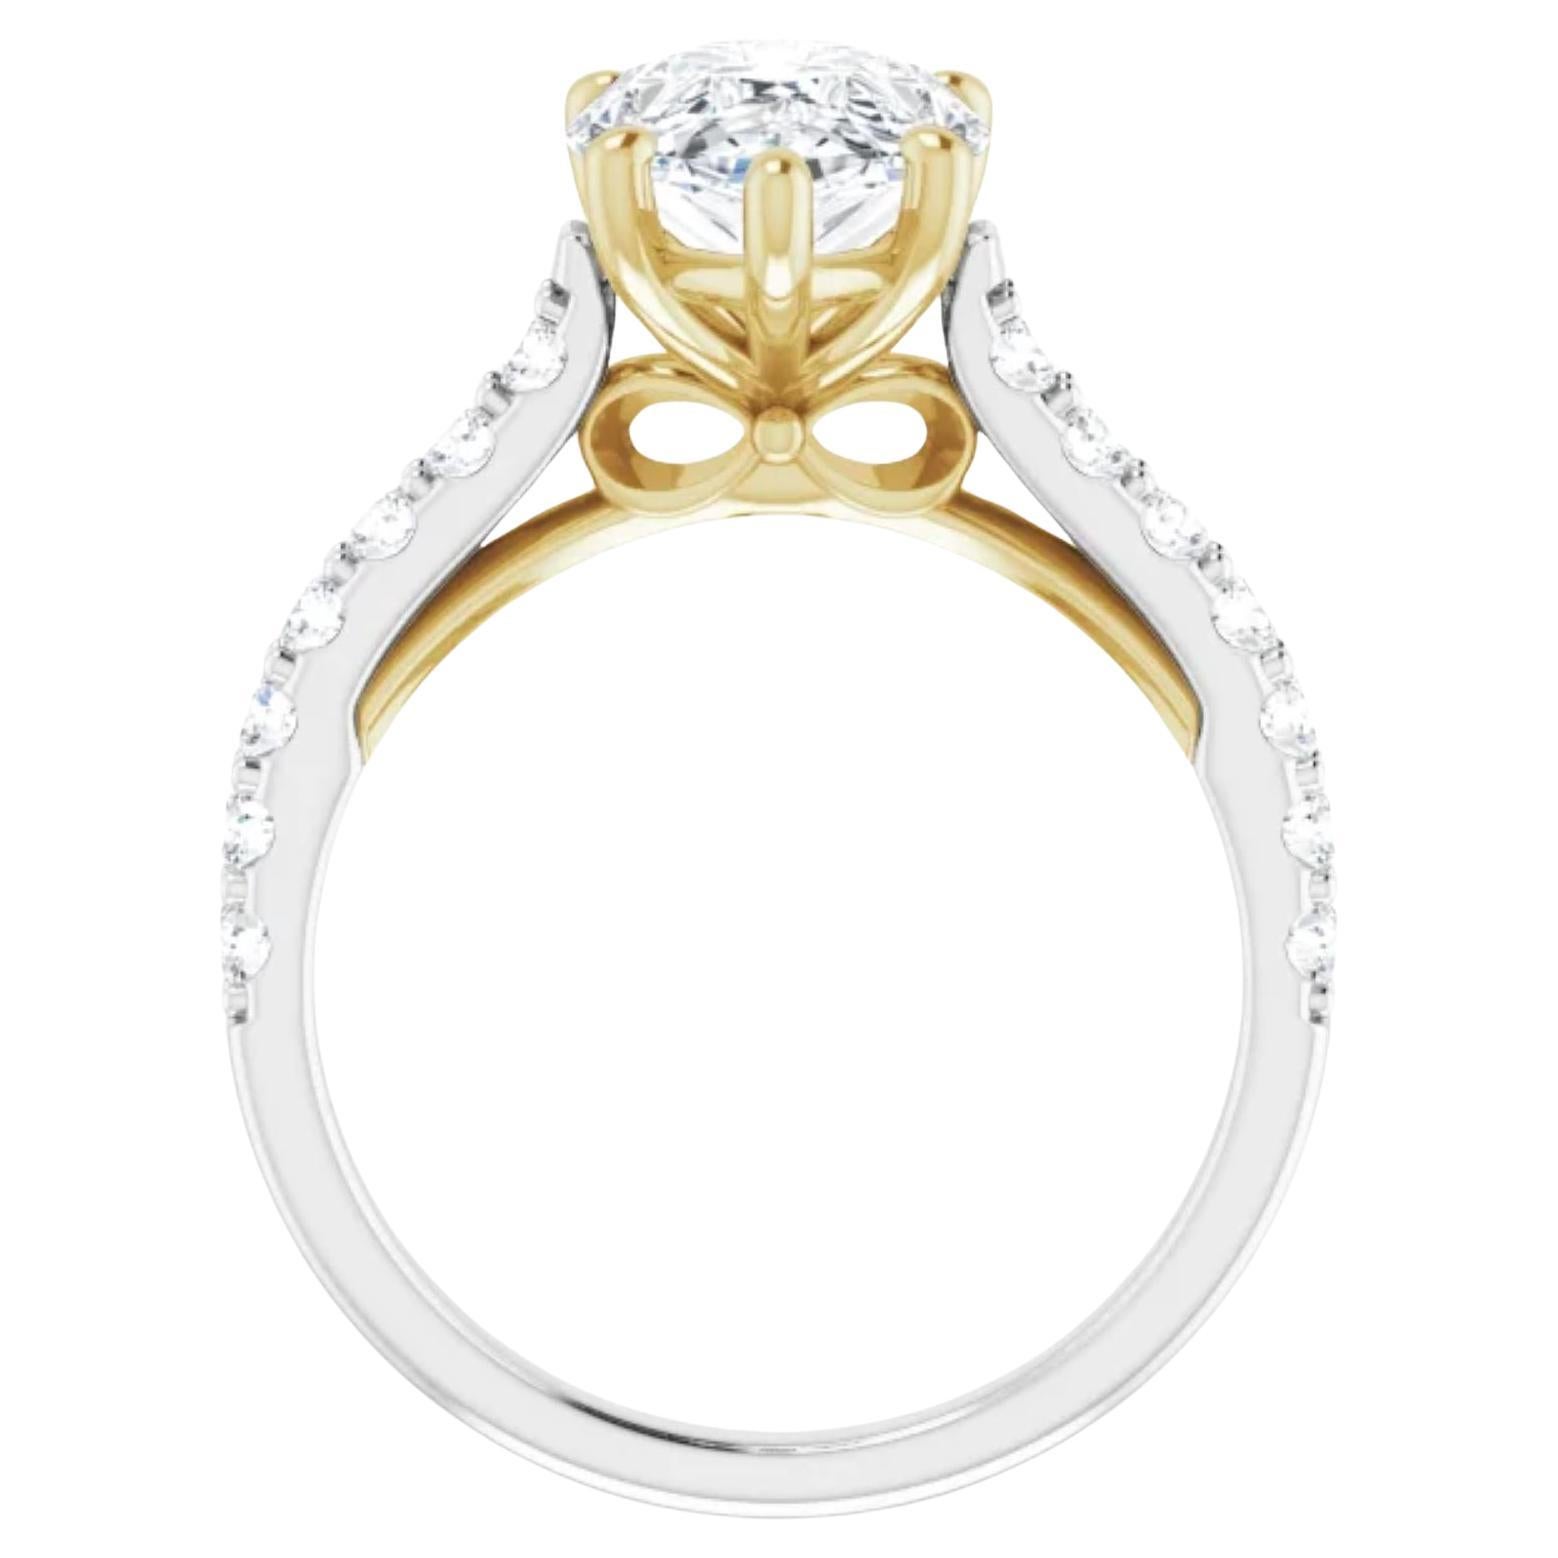 3 carat pear shaped engagement ring.